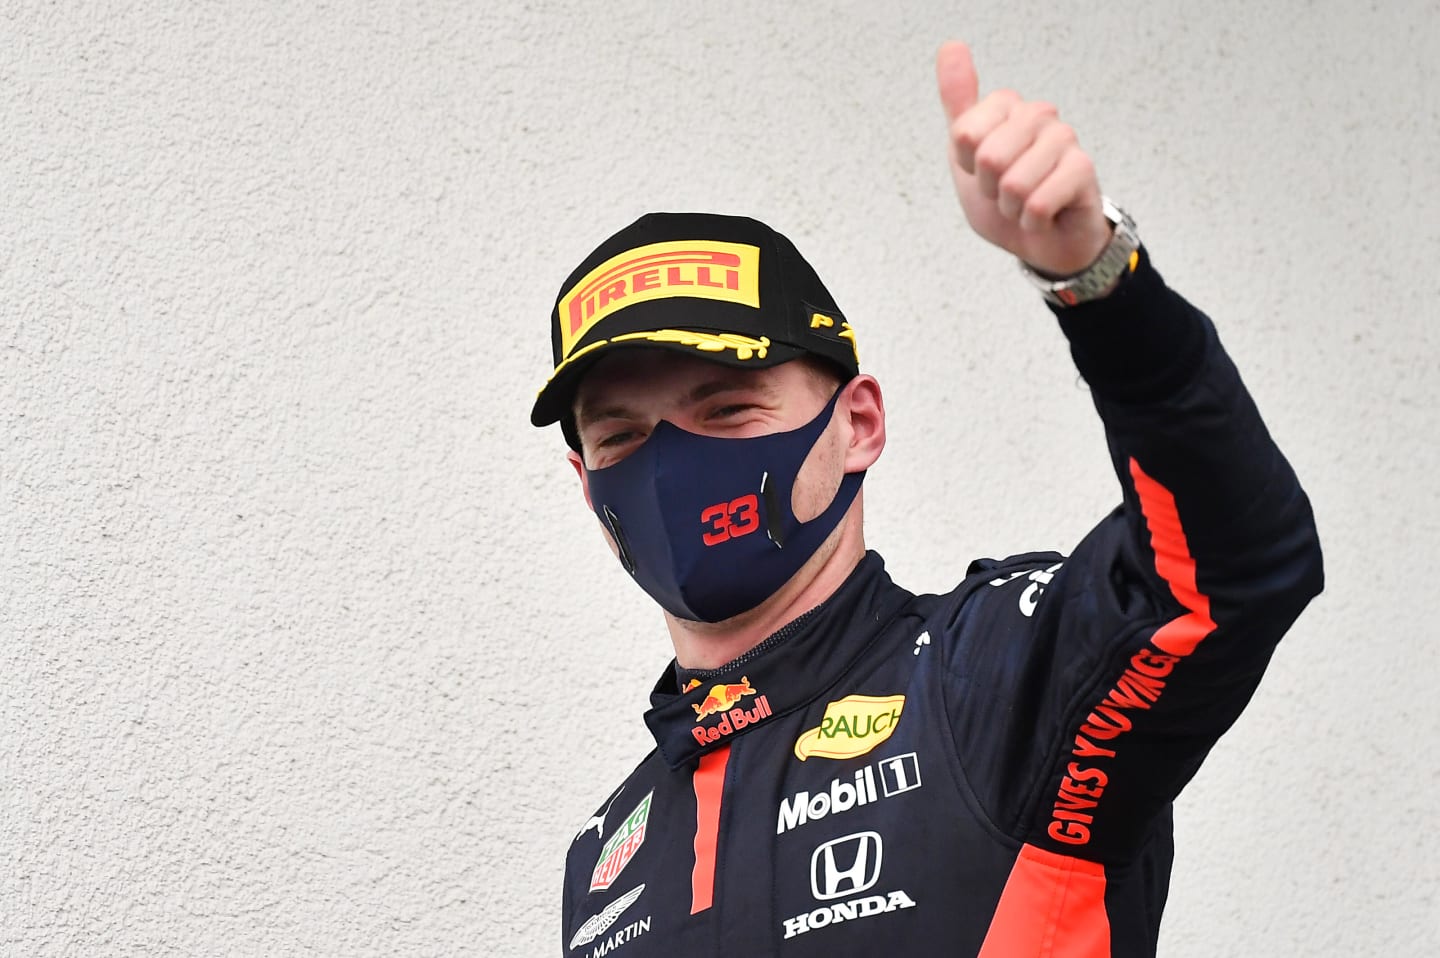 BUDAPEST, HUNGARY - JULY 19: Second placed Max Verstappen of Netherlands and Red Bull Racing